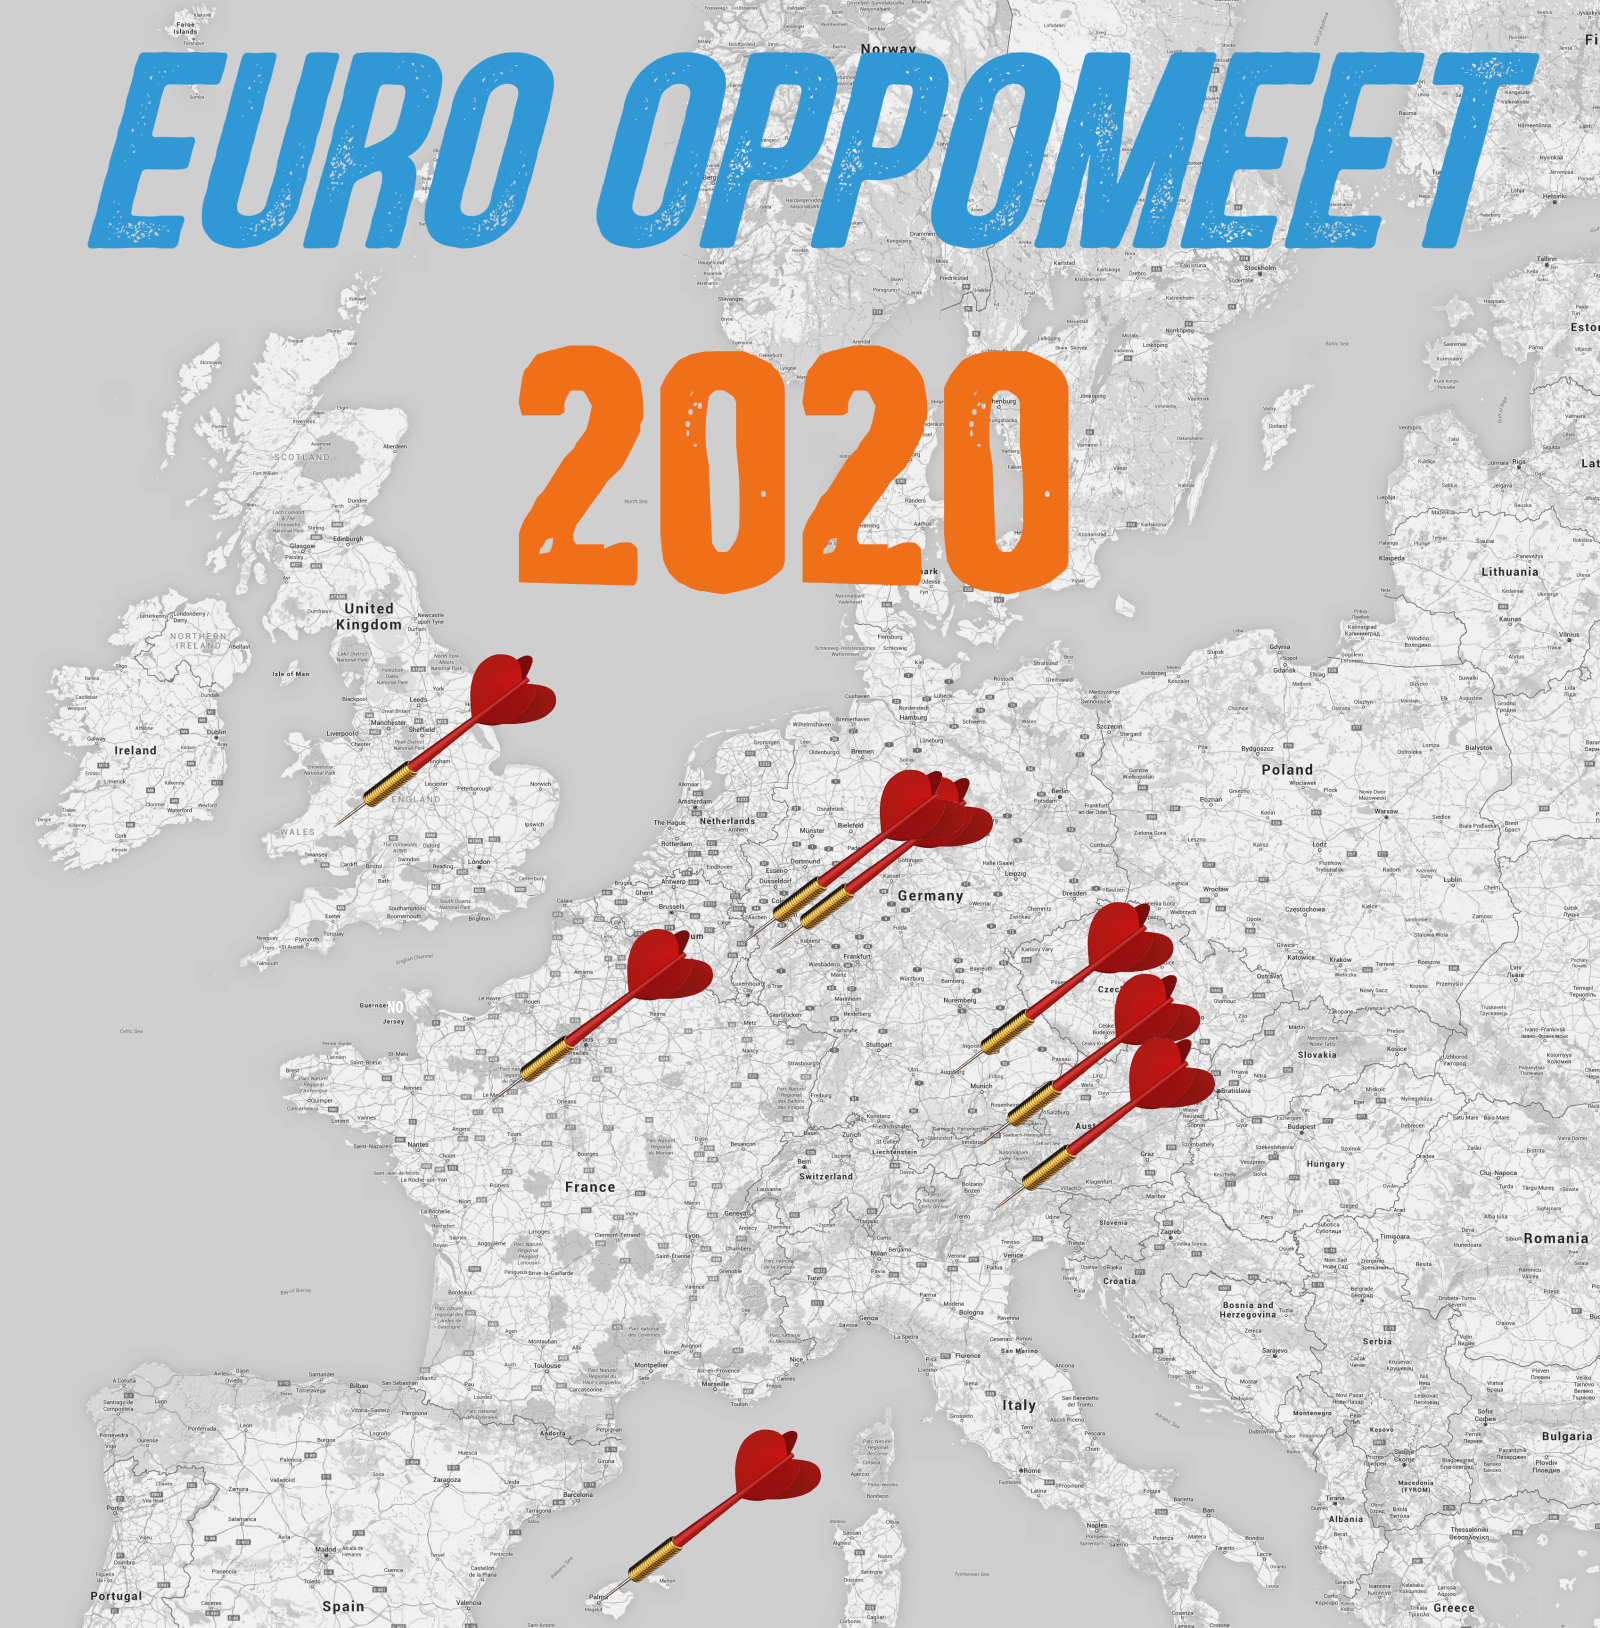 Illustration for article titled Eurooppomeet(s) 2020- Who, What, Where and When? Your suggestions needed!